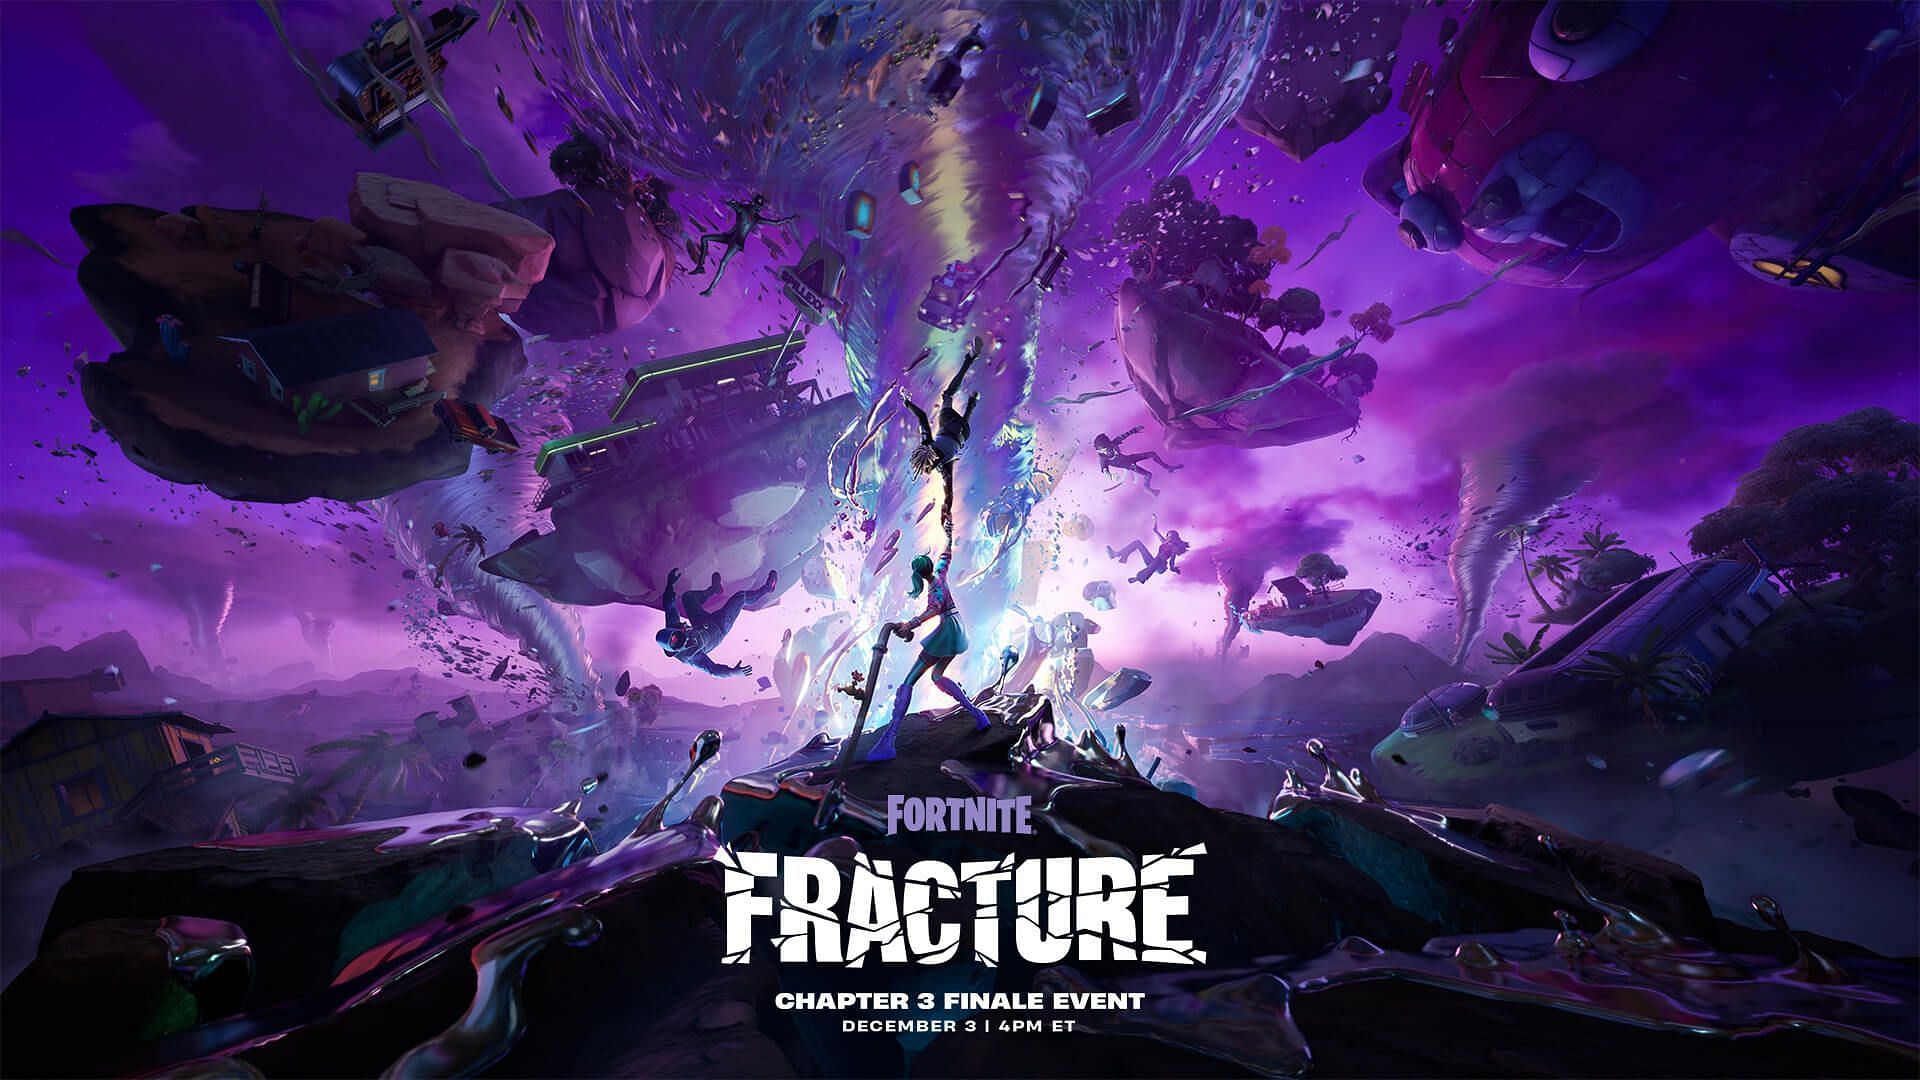 Fortnite Fracture live event might end up rupturing the island. (Image via Epic Games)